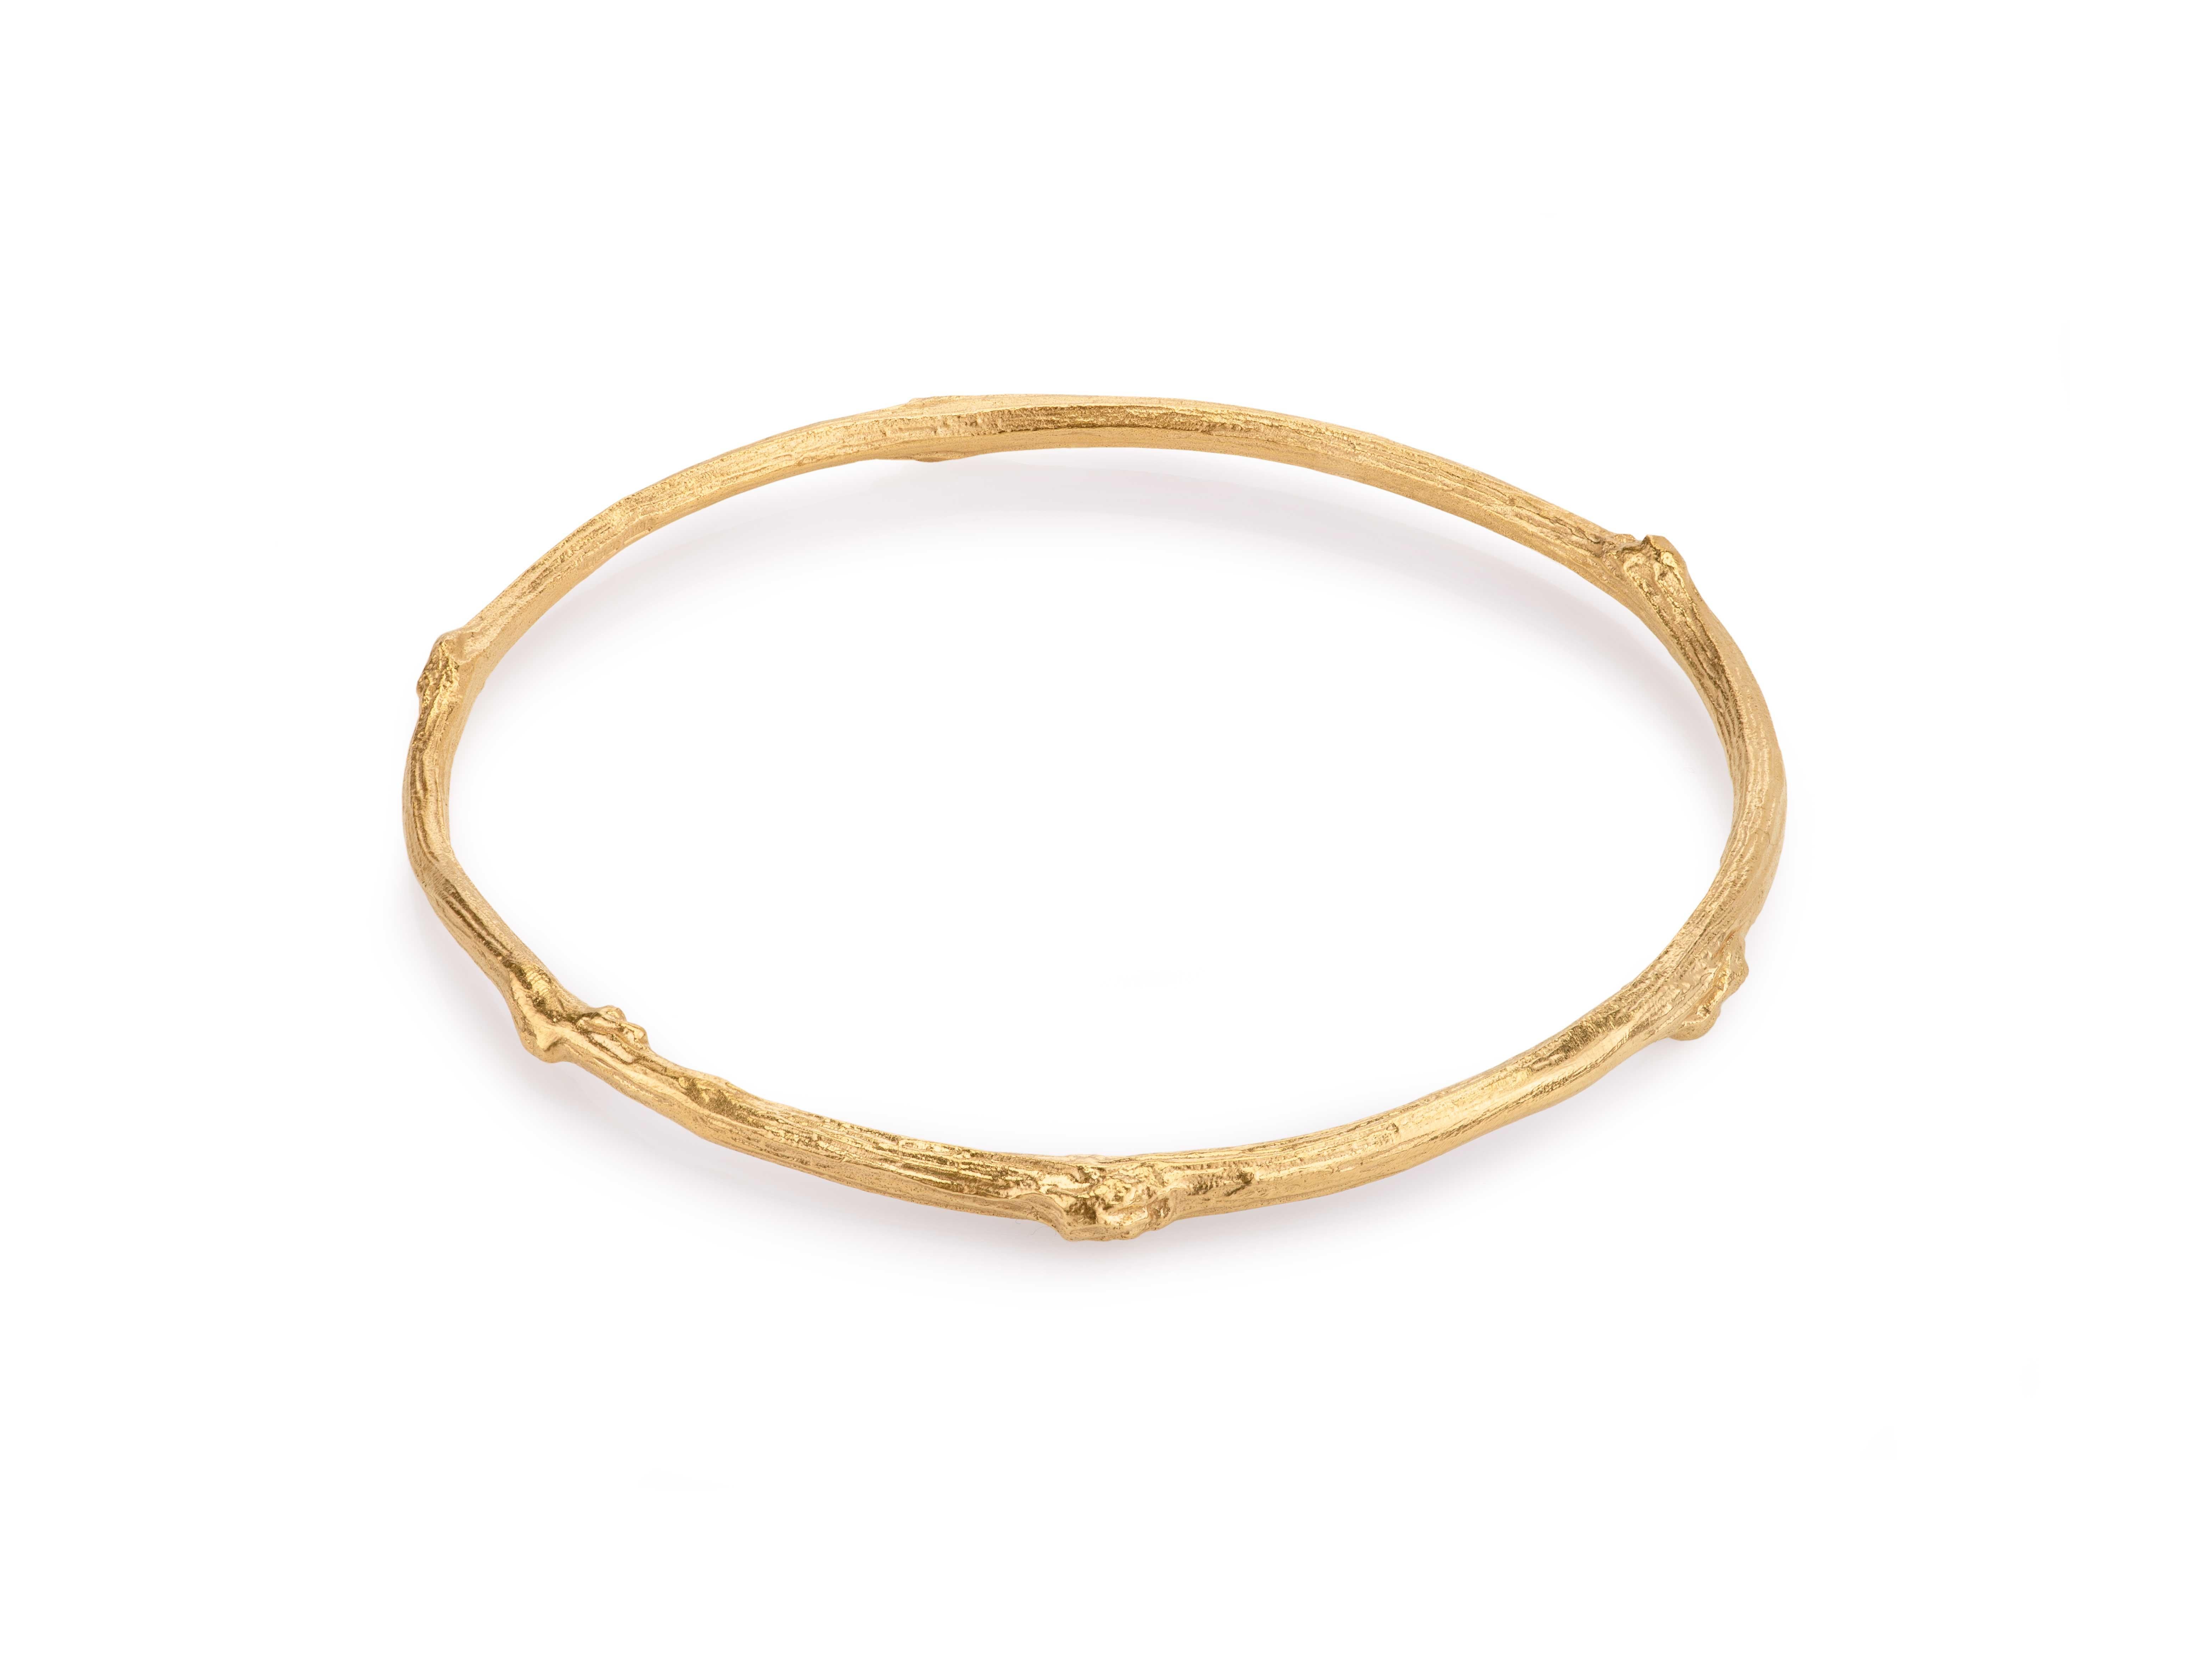 We made this beautiful solid 14 carat gold Rose twig bangle using a cast of a Rose twig we found in the Rose garden at Cockington Court, which is a stately home in Devon, England.

The rose twig bangle is a beautiful piece of solid piece of gold, it